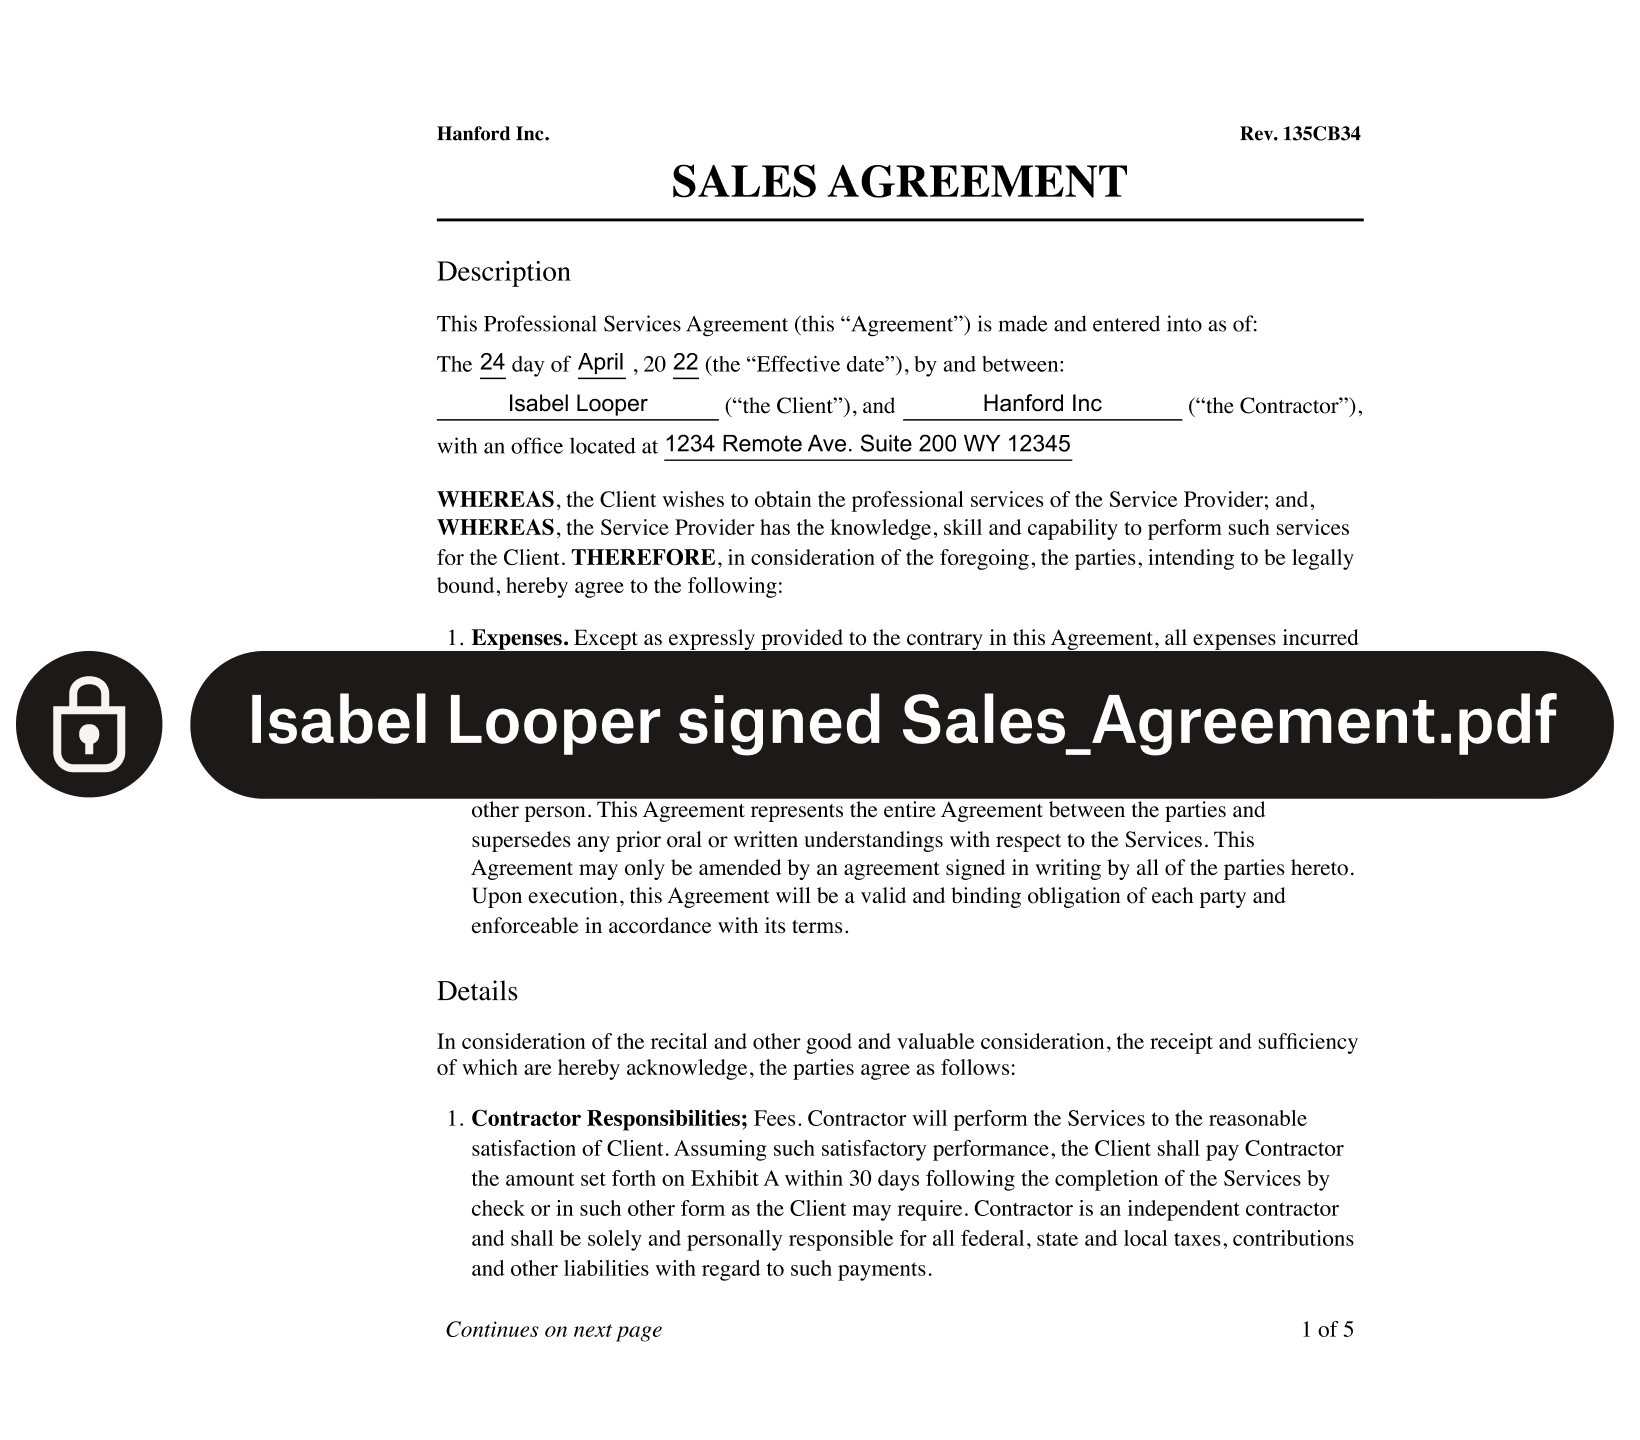 A sales agreement form with security padlock and text